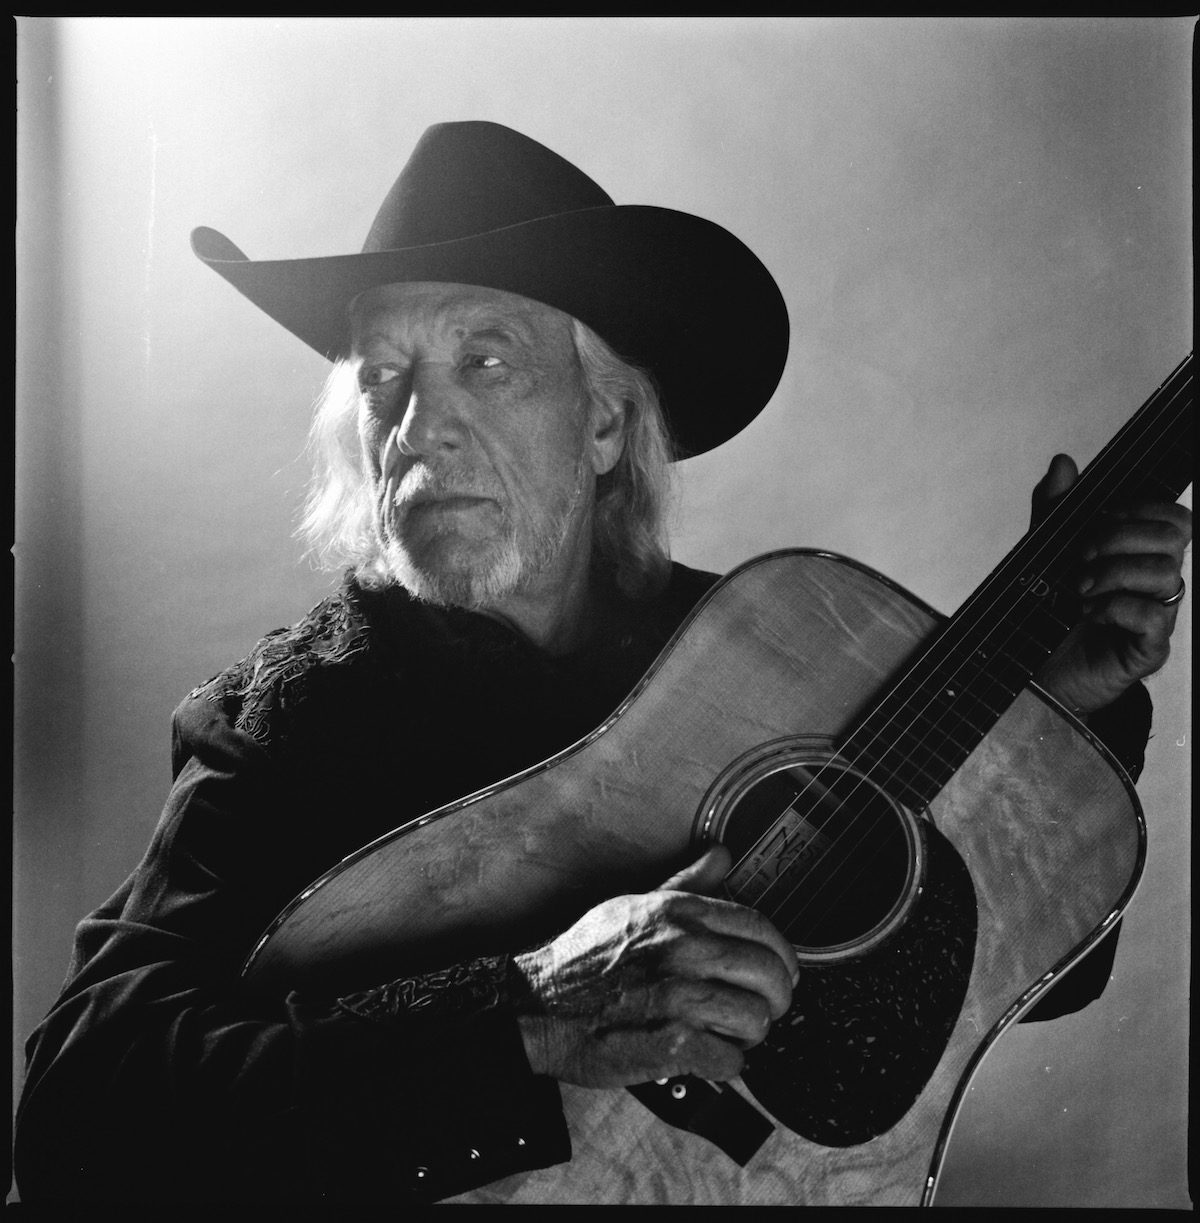 A black and white portrait of John Anderson with acoustic guitar and black hat